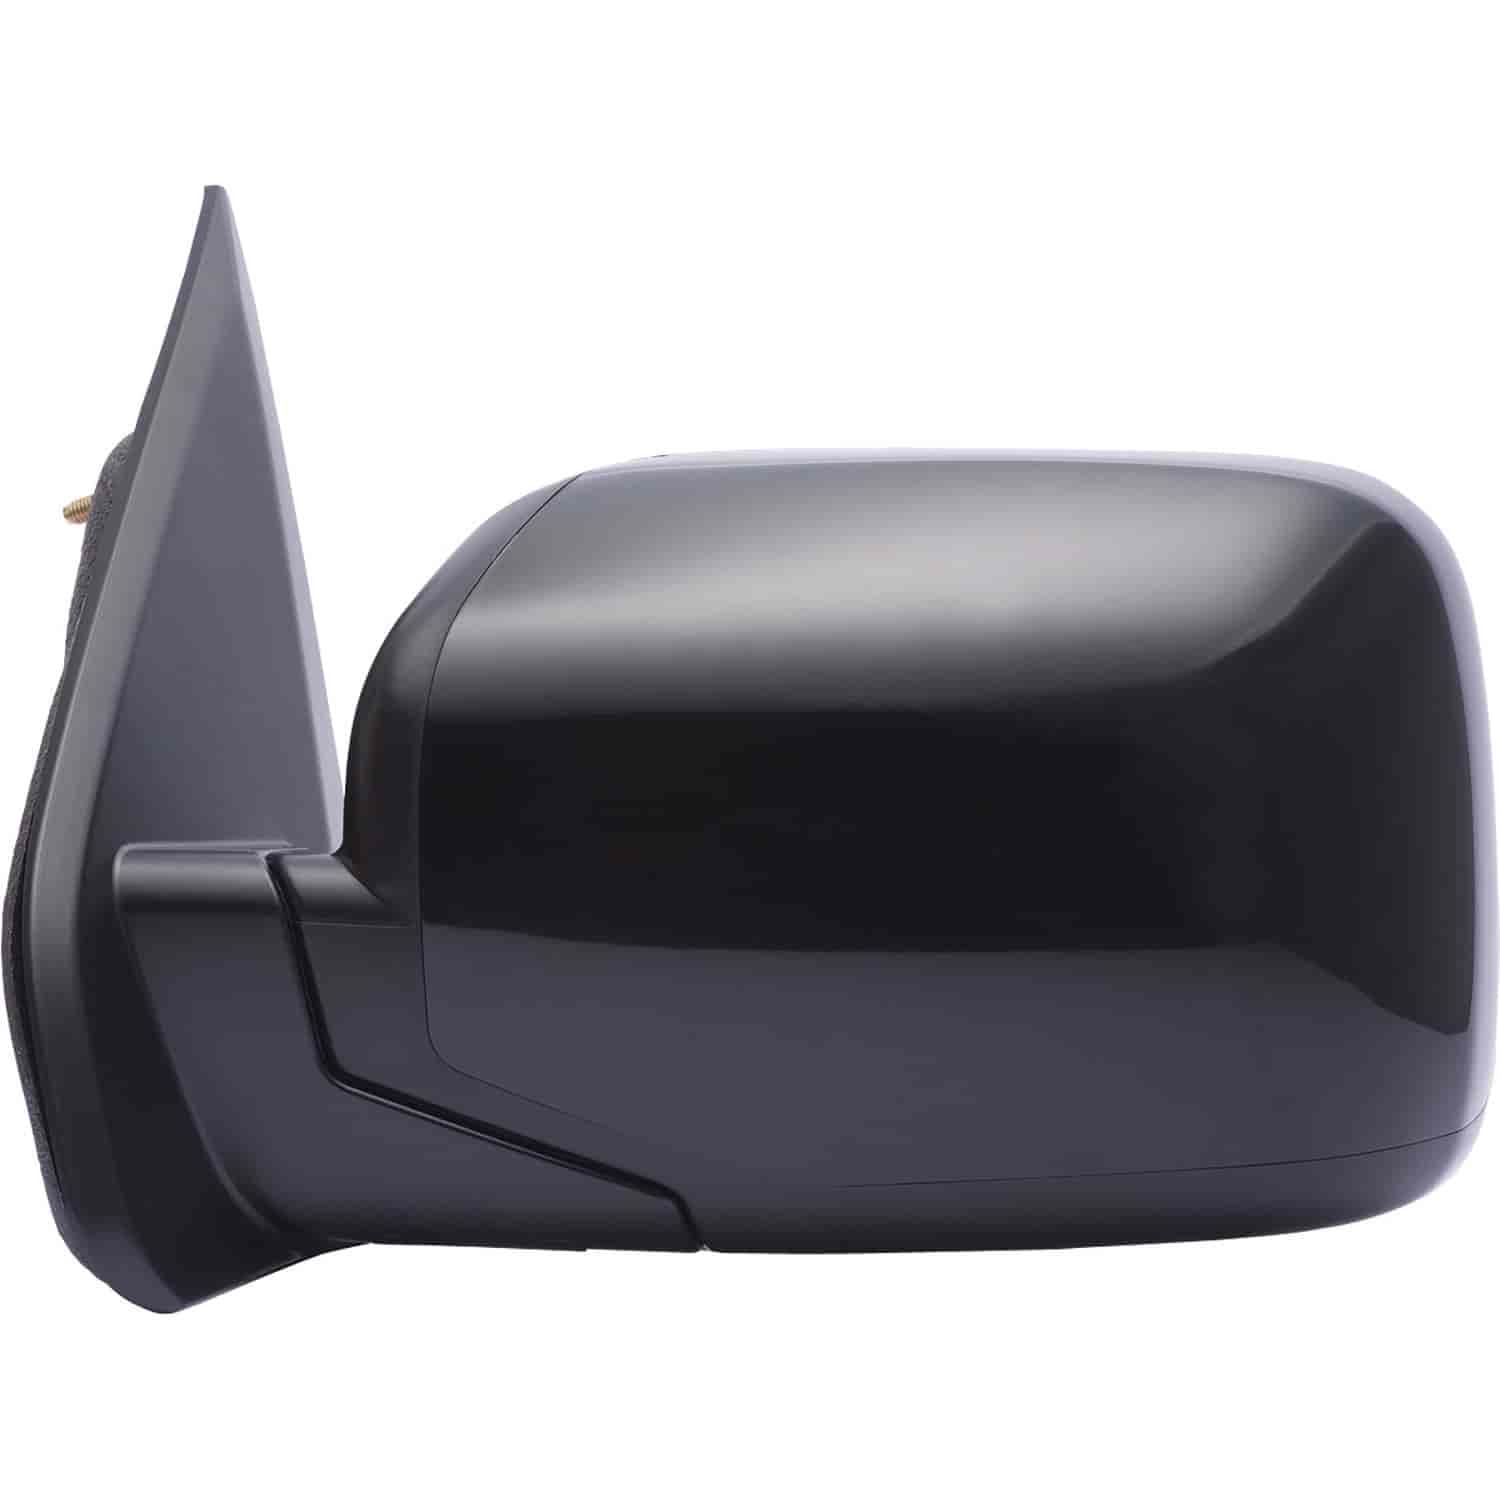 OEM Style Replacement mirror for 09-14 Honda Pilot driver side mirror tested to fit and function lik